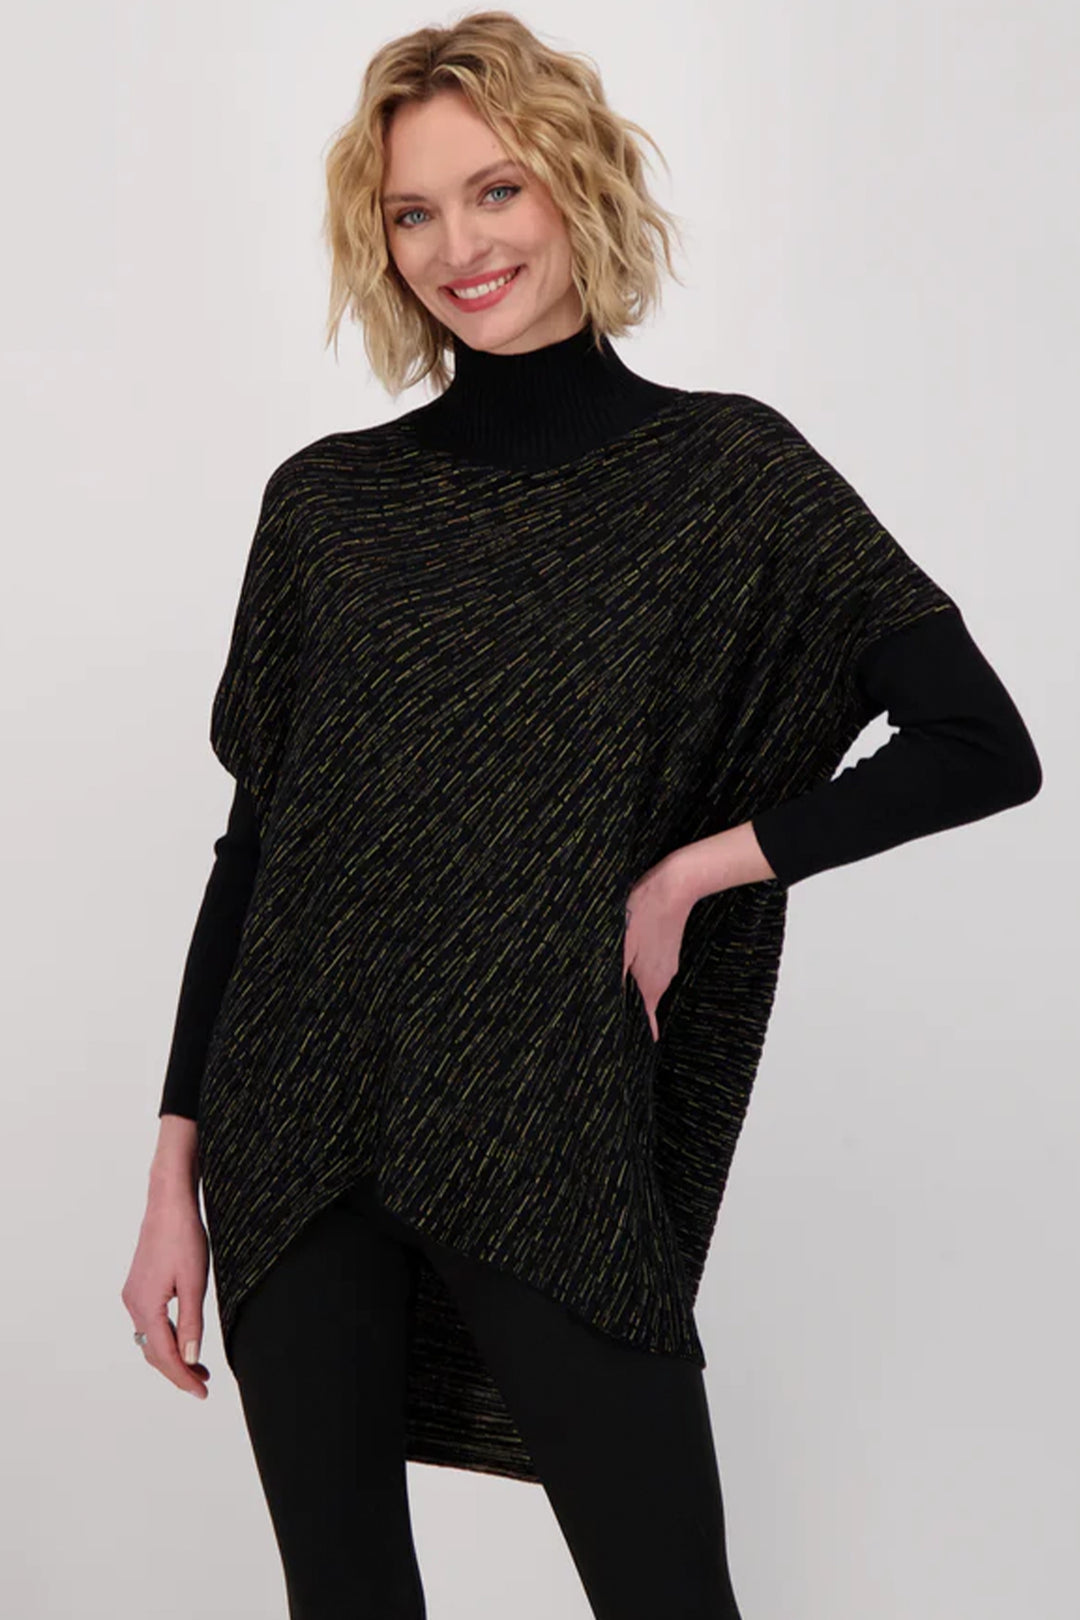 With a relaxed fit, you can keep it casual or dress it up for any occasion. Step out of your comfort zone and take your outfit to the next level with this perfect fall knit top!